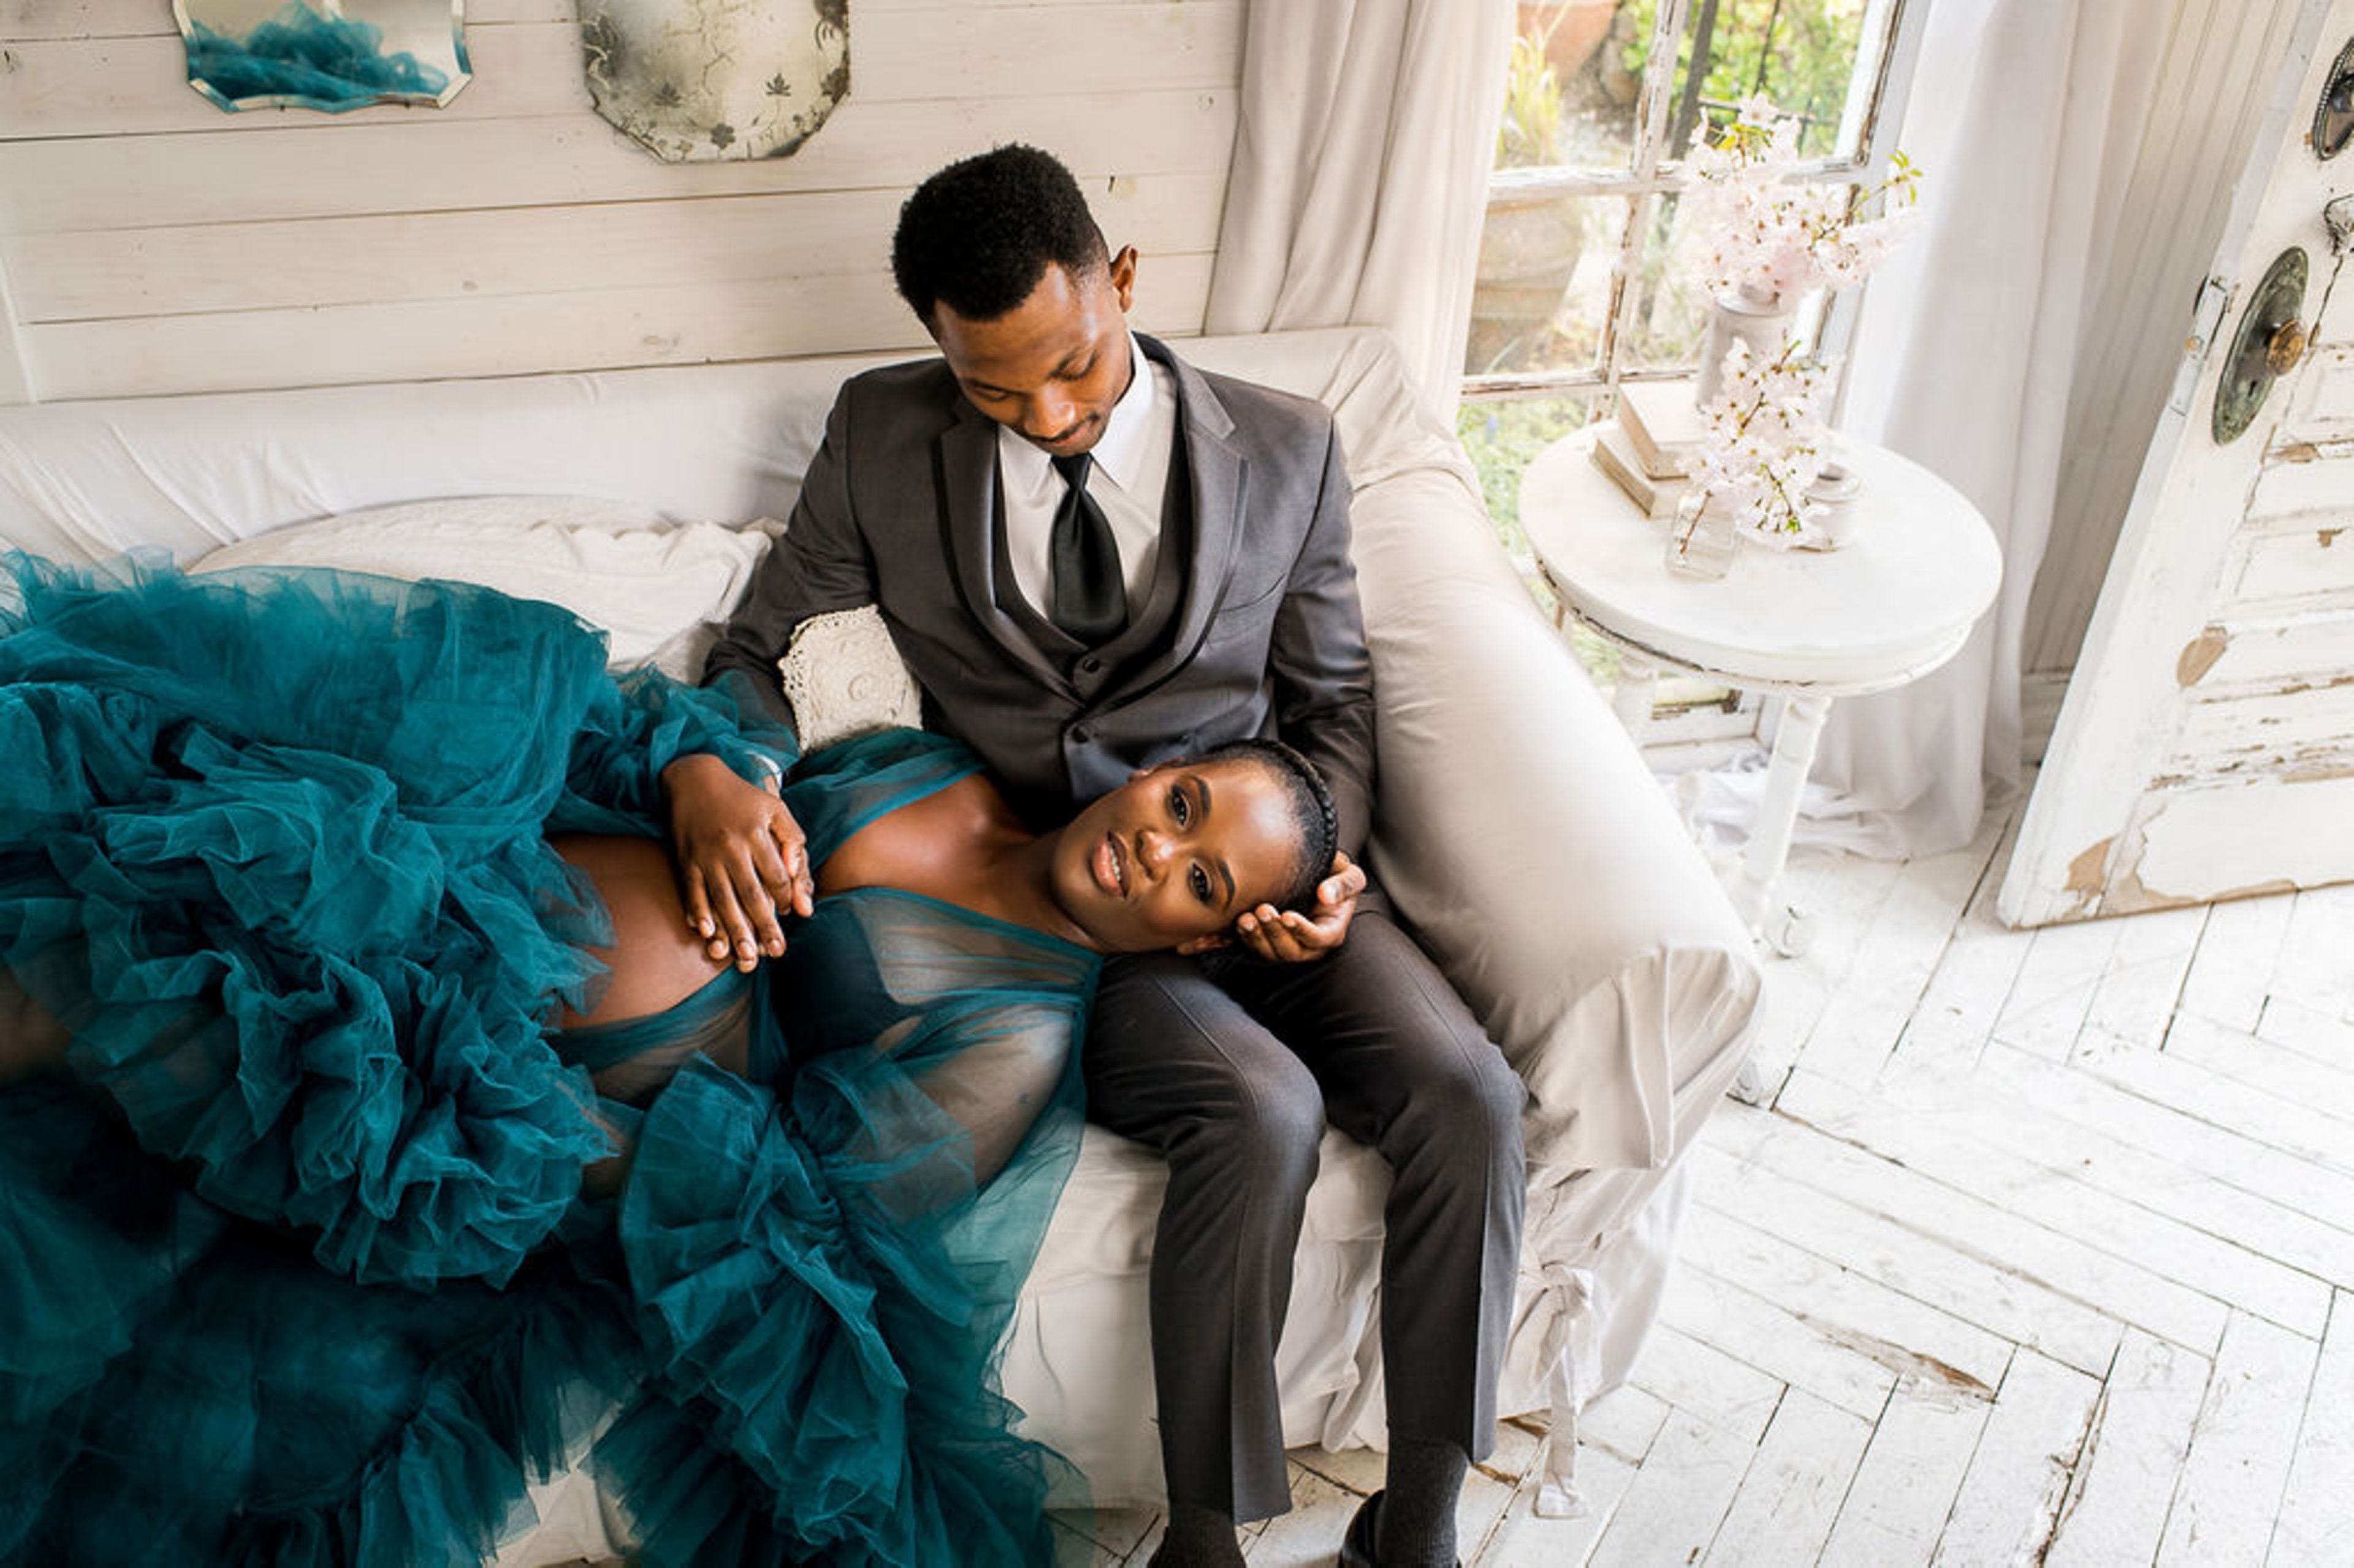 A maternity photo shoot of a man and a woman sitting on a rustic couch surrounded by blue and white accents.